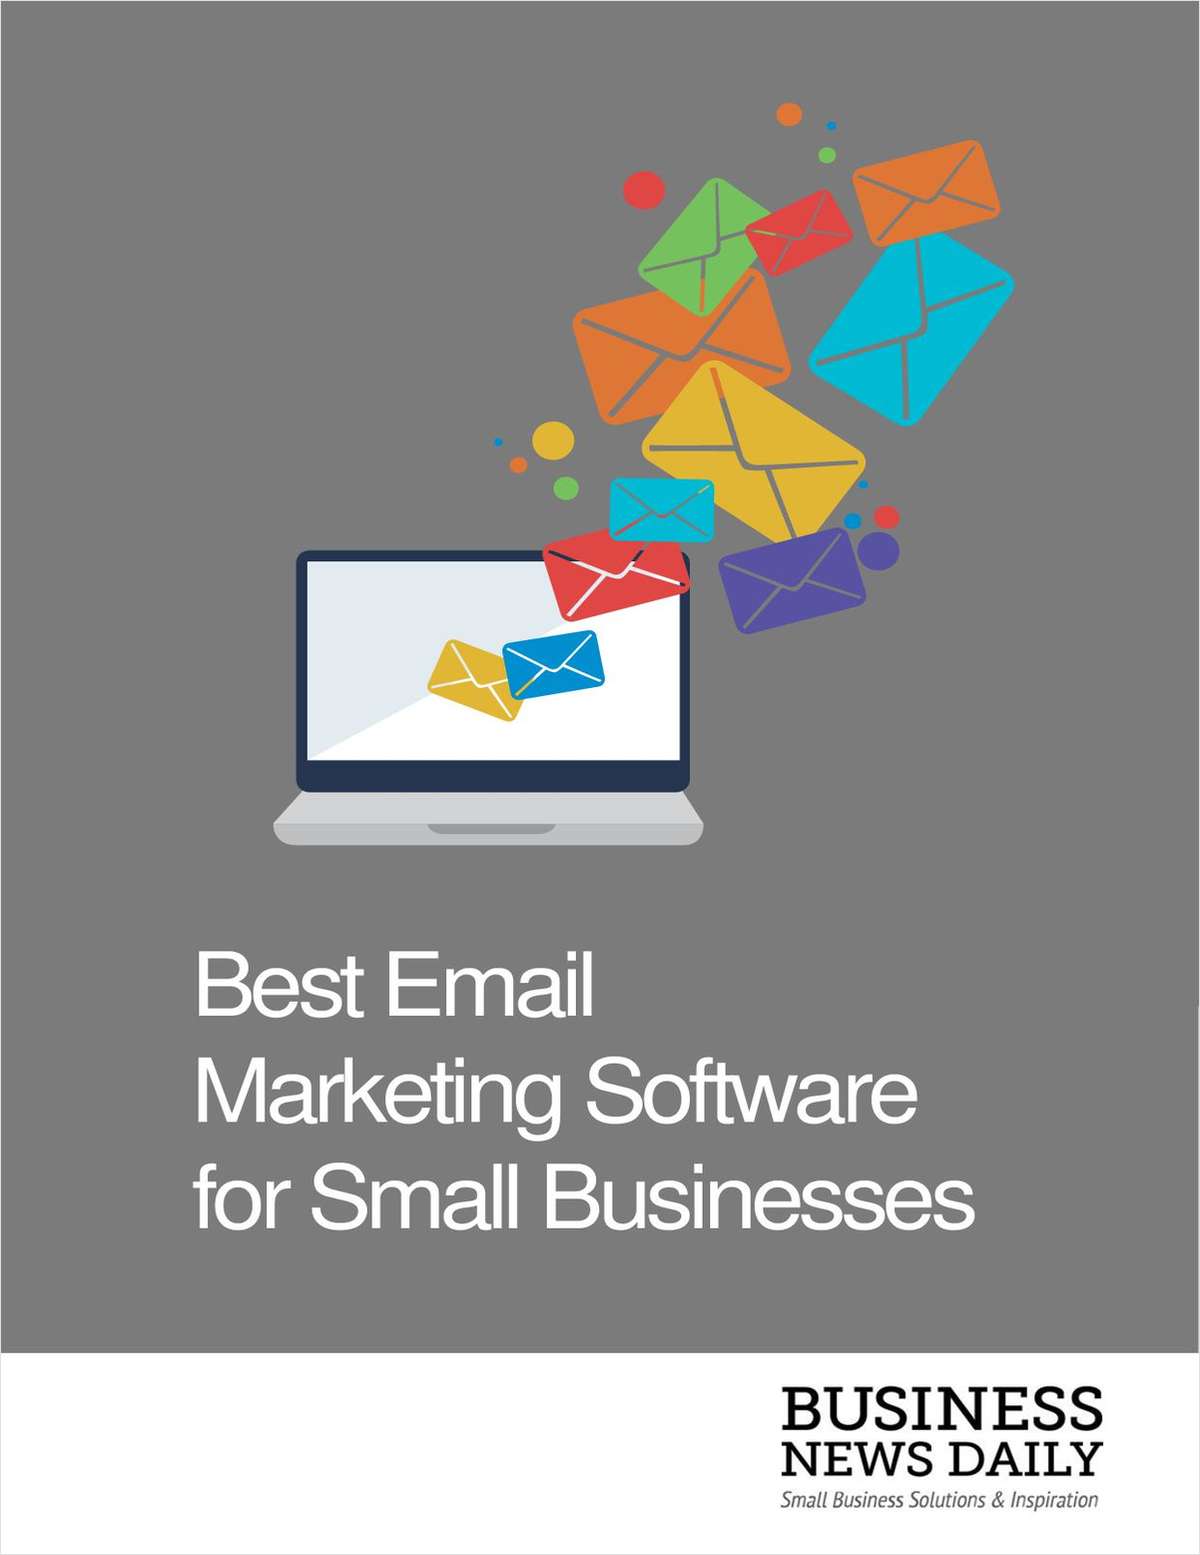 Best Email Marketing Software for Small Businesses